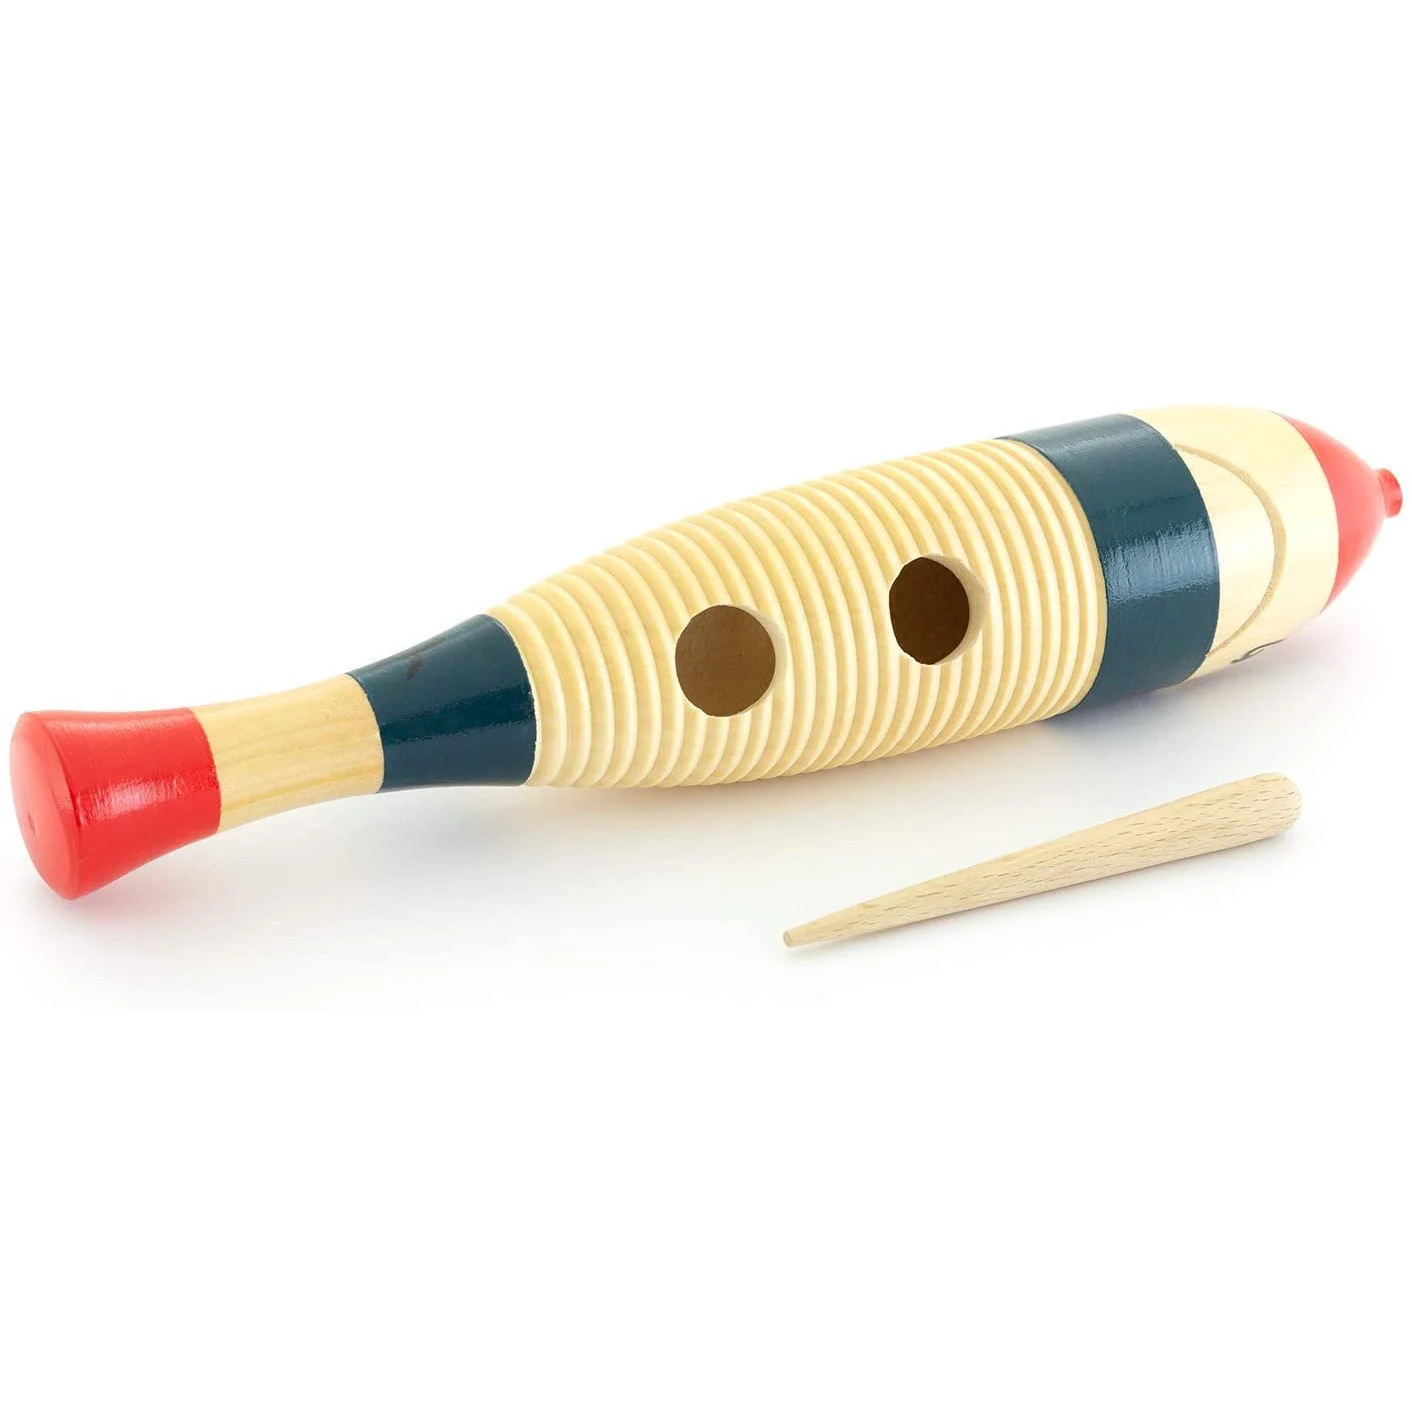 Gelsonlab Hs-g2 Wooden Fish Shape Guiro Percussion Instrument With Scraper Kindergarten Early Learning Wooden Guiro - Buy Guiro For Children,Kids Guiro ,Guiro Product on Alibaba.com